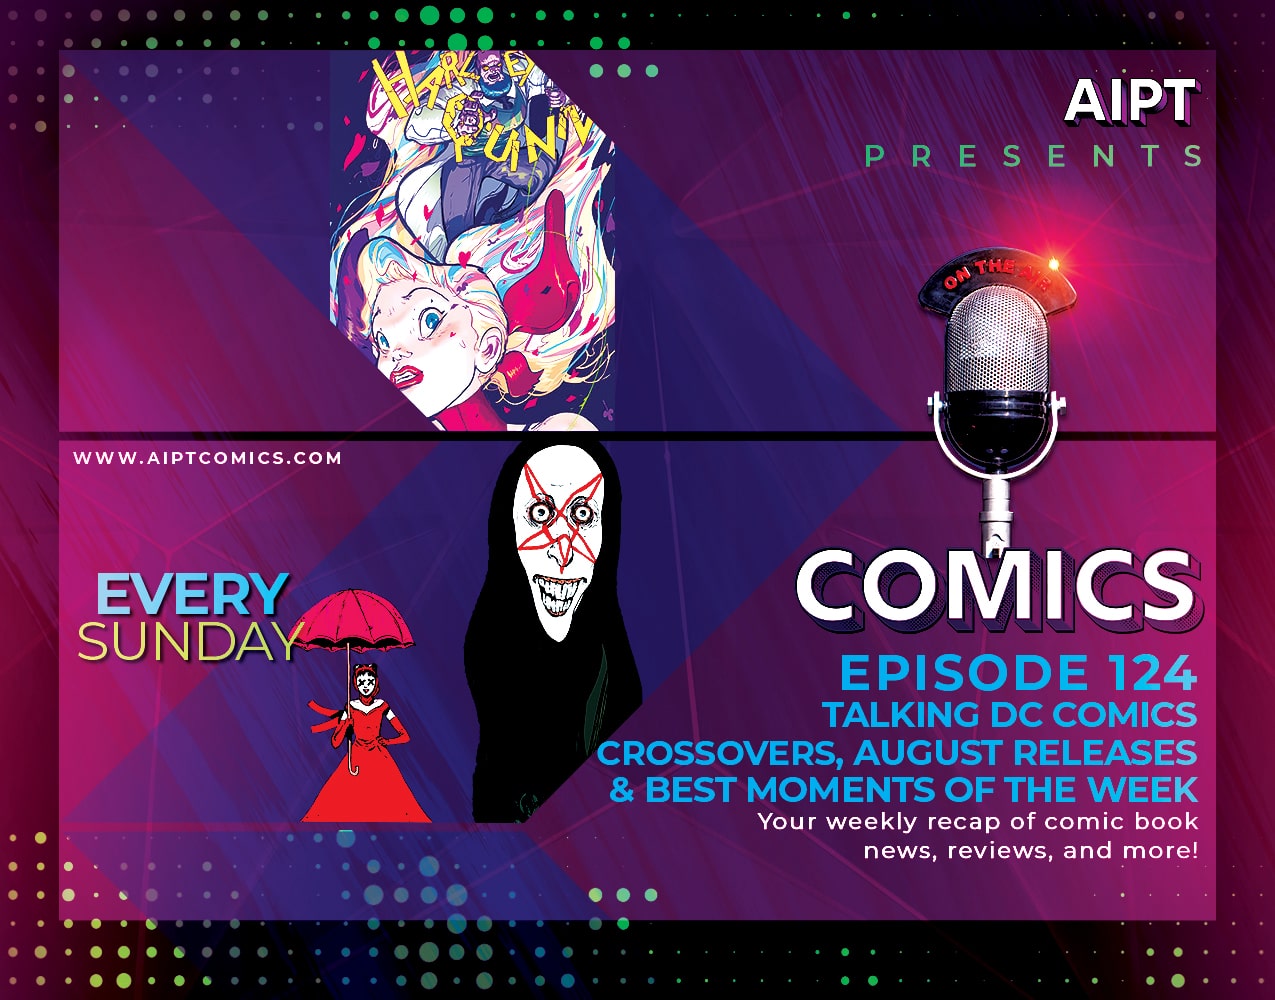 AIPT Comics Podcast Episode 124: Talking DC Comics crossovers, August releases & best moments of the week